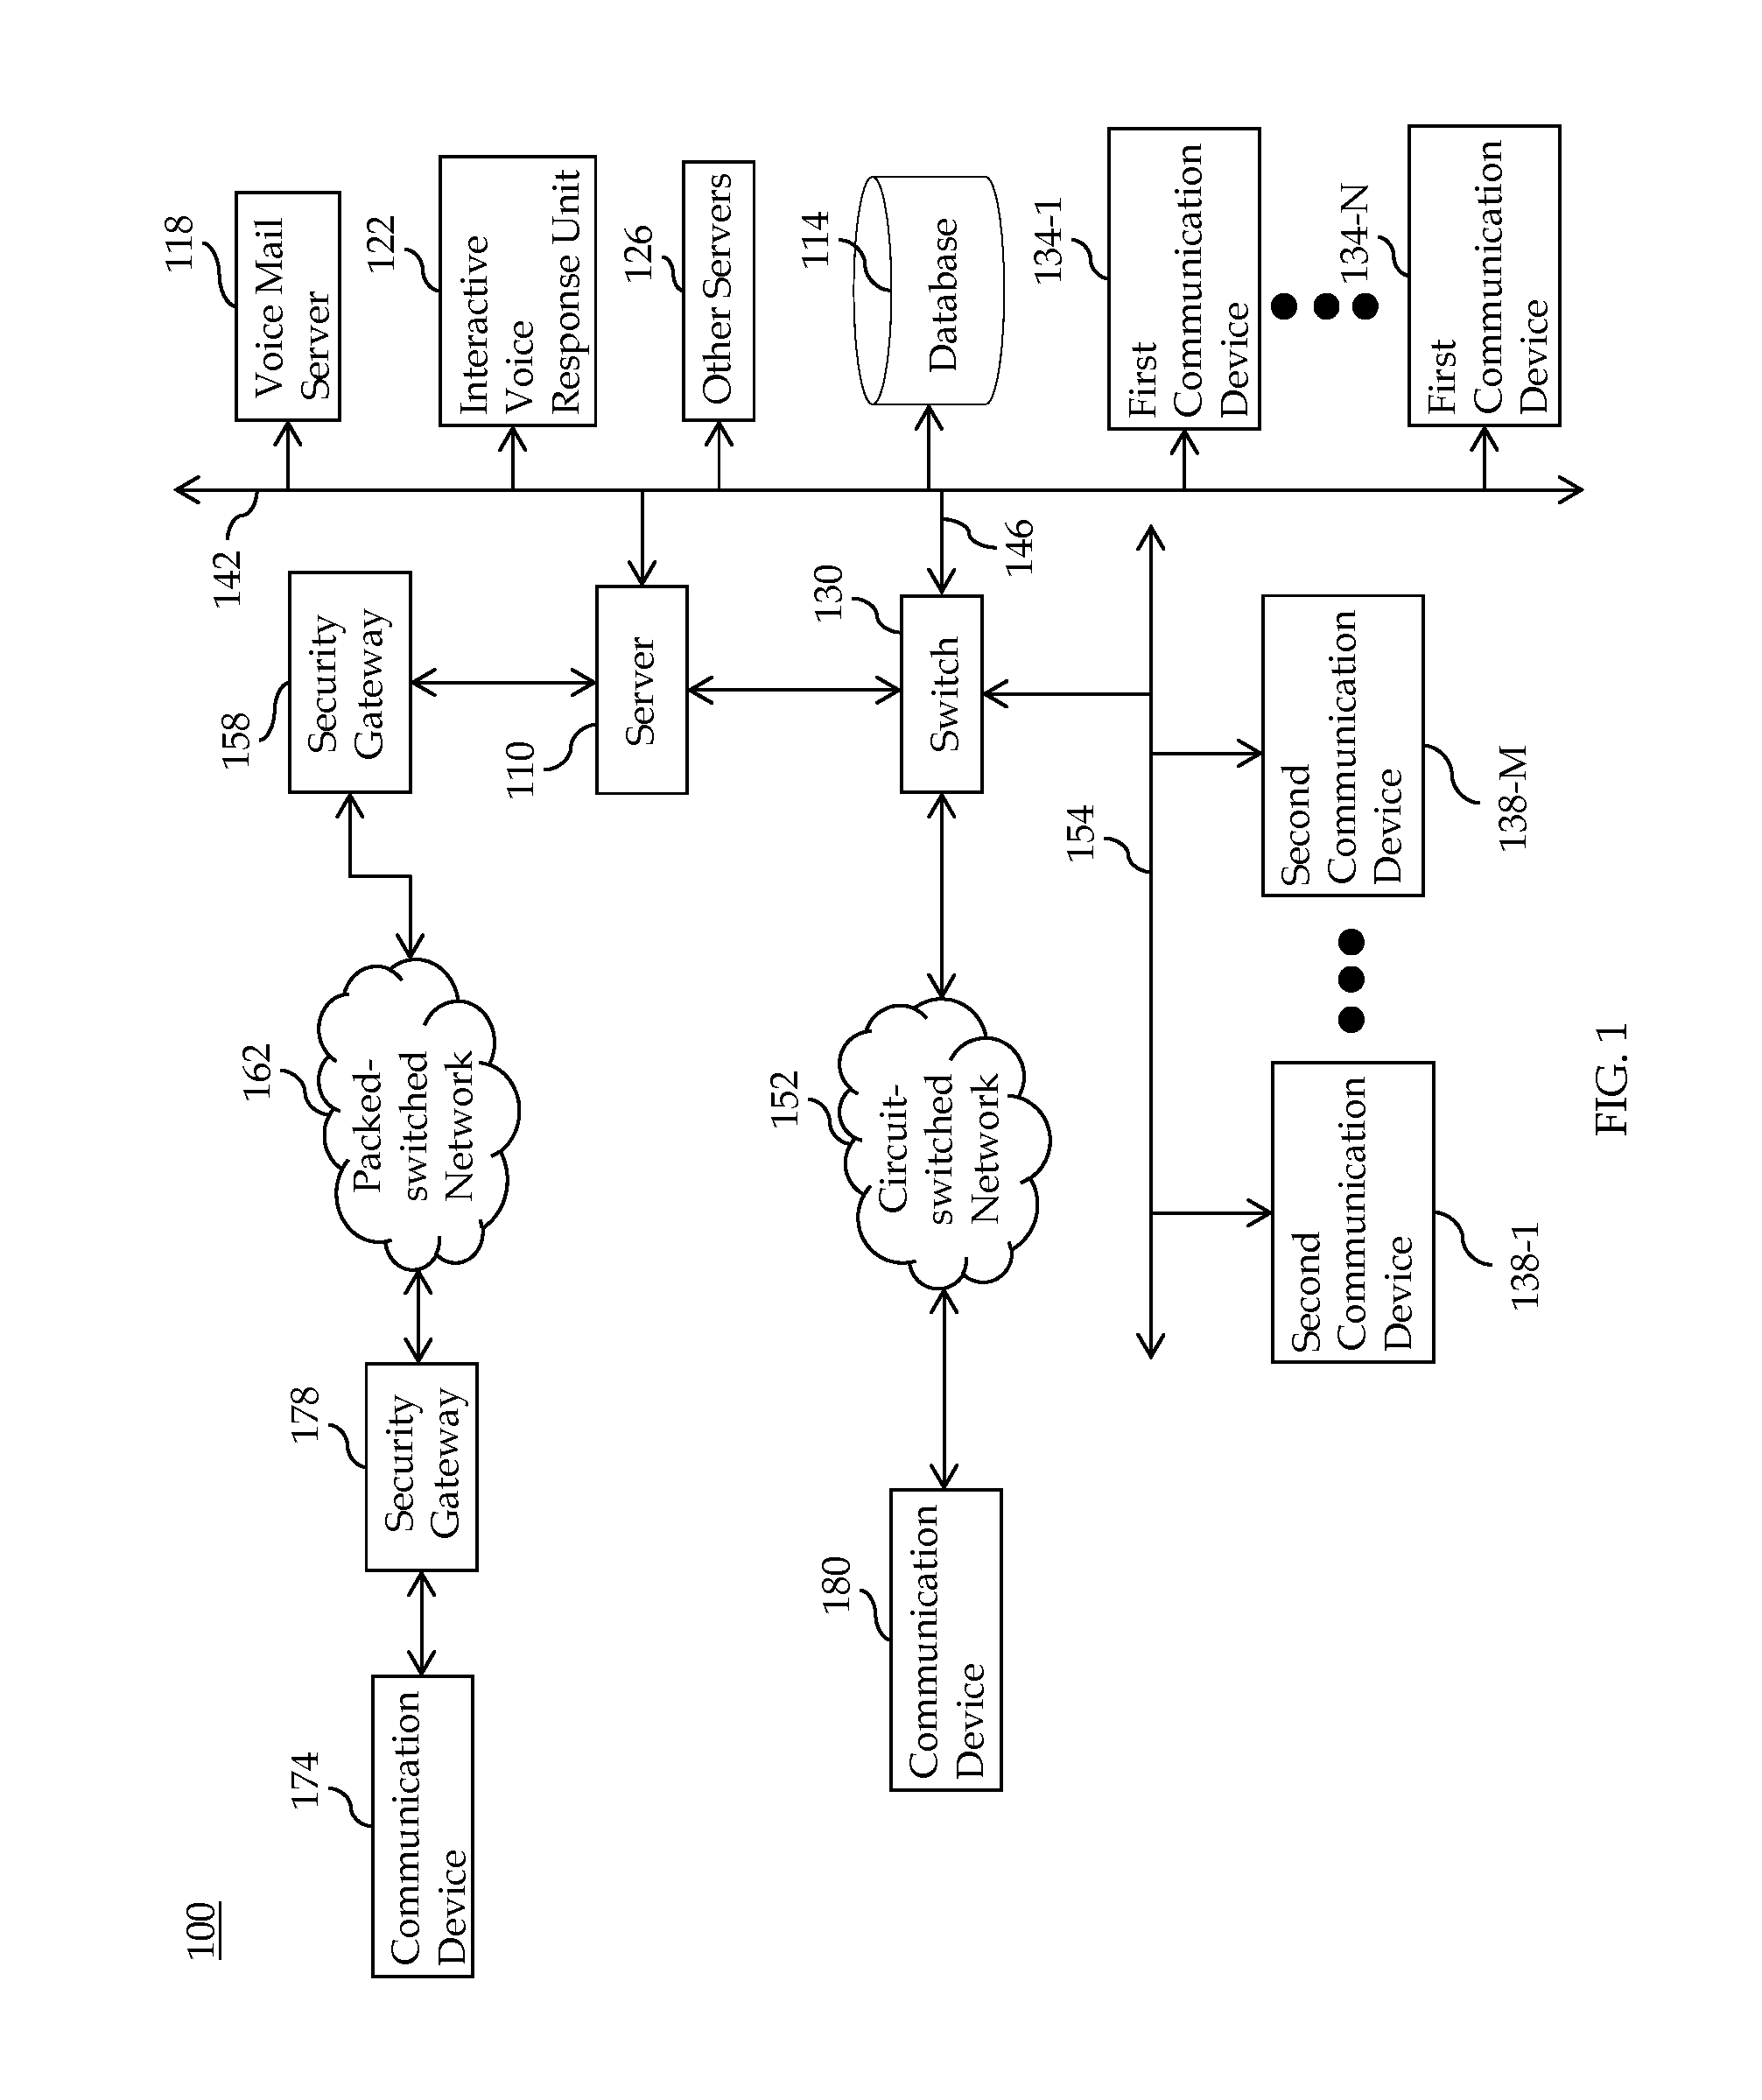 System and method for managing customer interactions in an enterprise